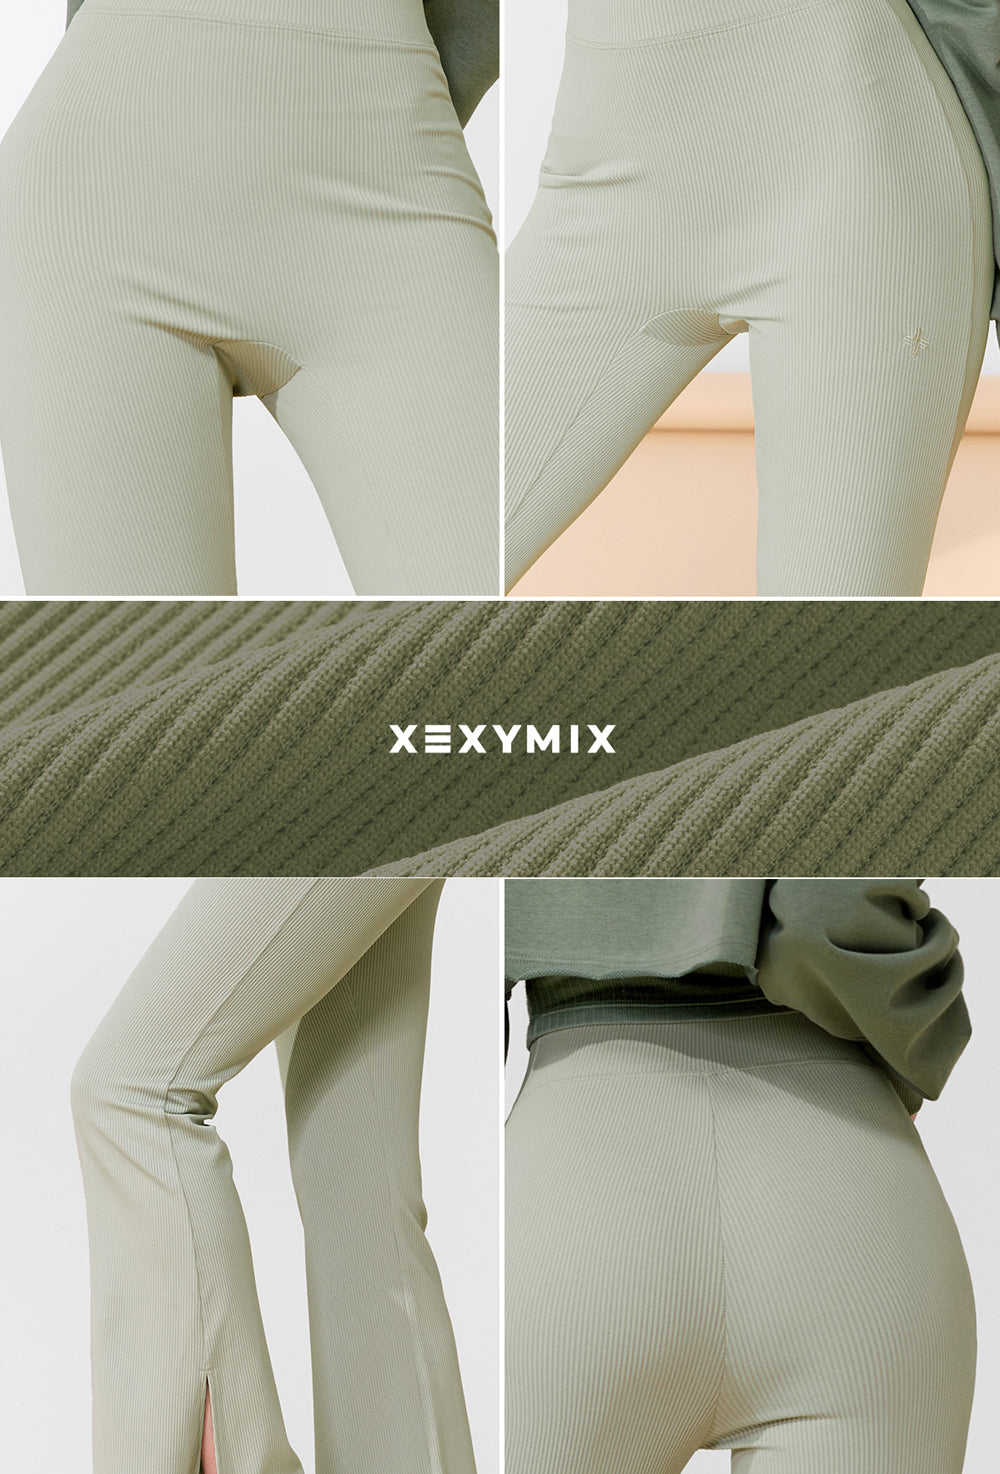 Ribbed Tension Boots Cut Slit Pants - Sage Gray